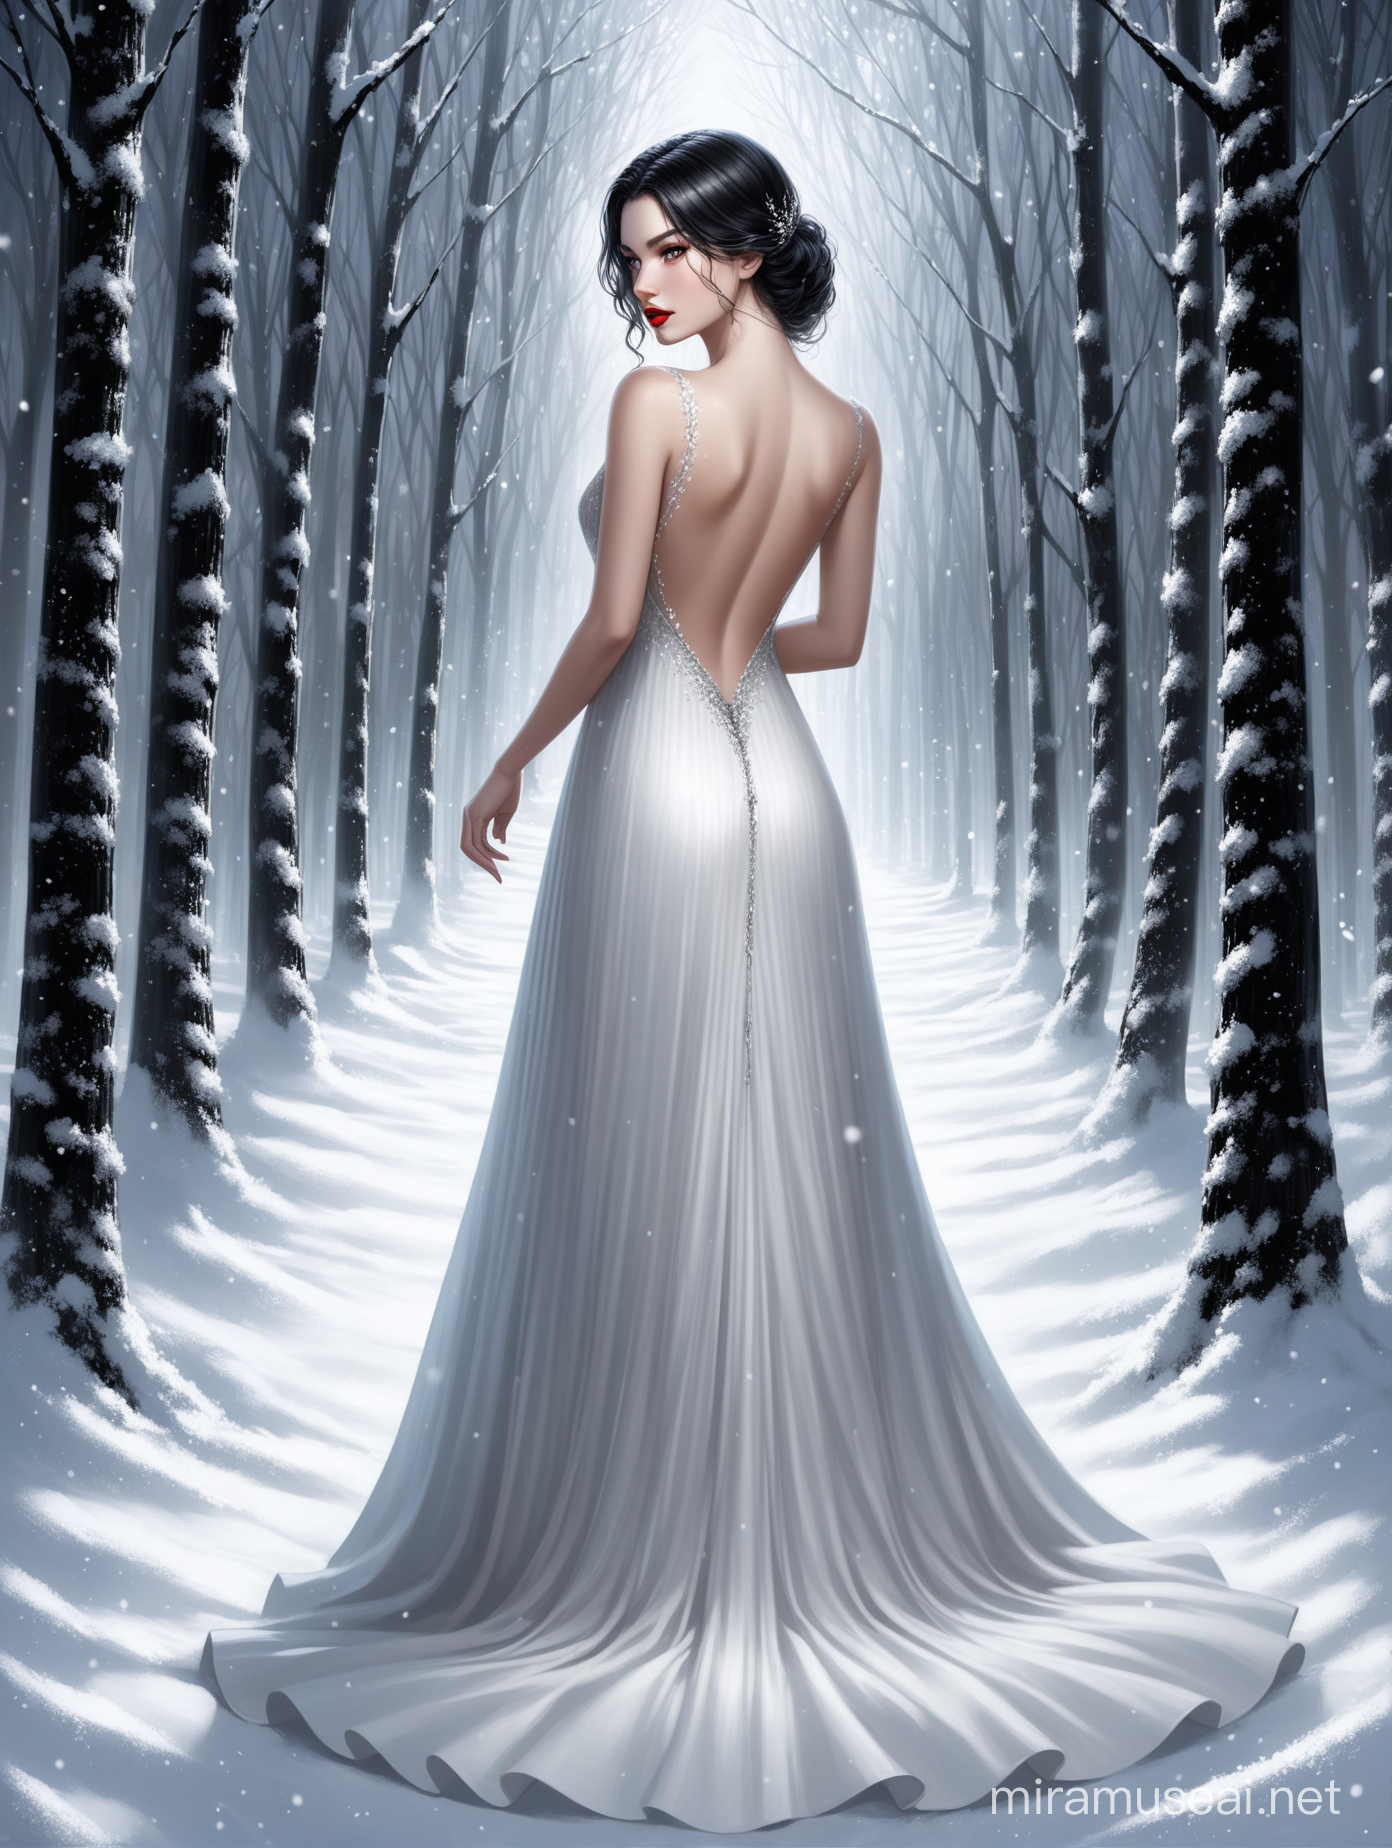 Aivision, full body of beautiful young women , full red lips,prety eyes, black hair. In shining snow - white , long gown with Exposed back, shining forest around . fairy tale , realistic facial features . Realistic hair texture,elegant , crispy quality Federico Bebber's expressive, black and white, night